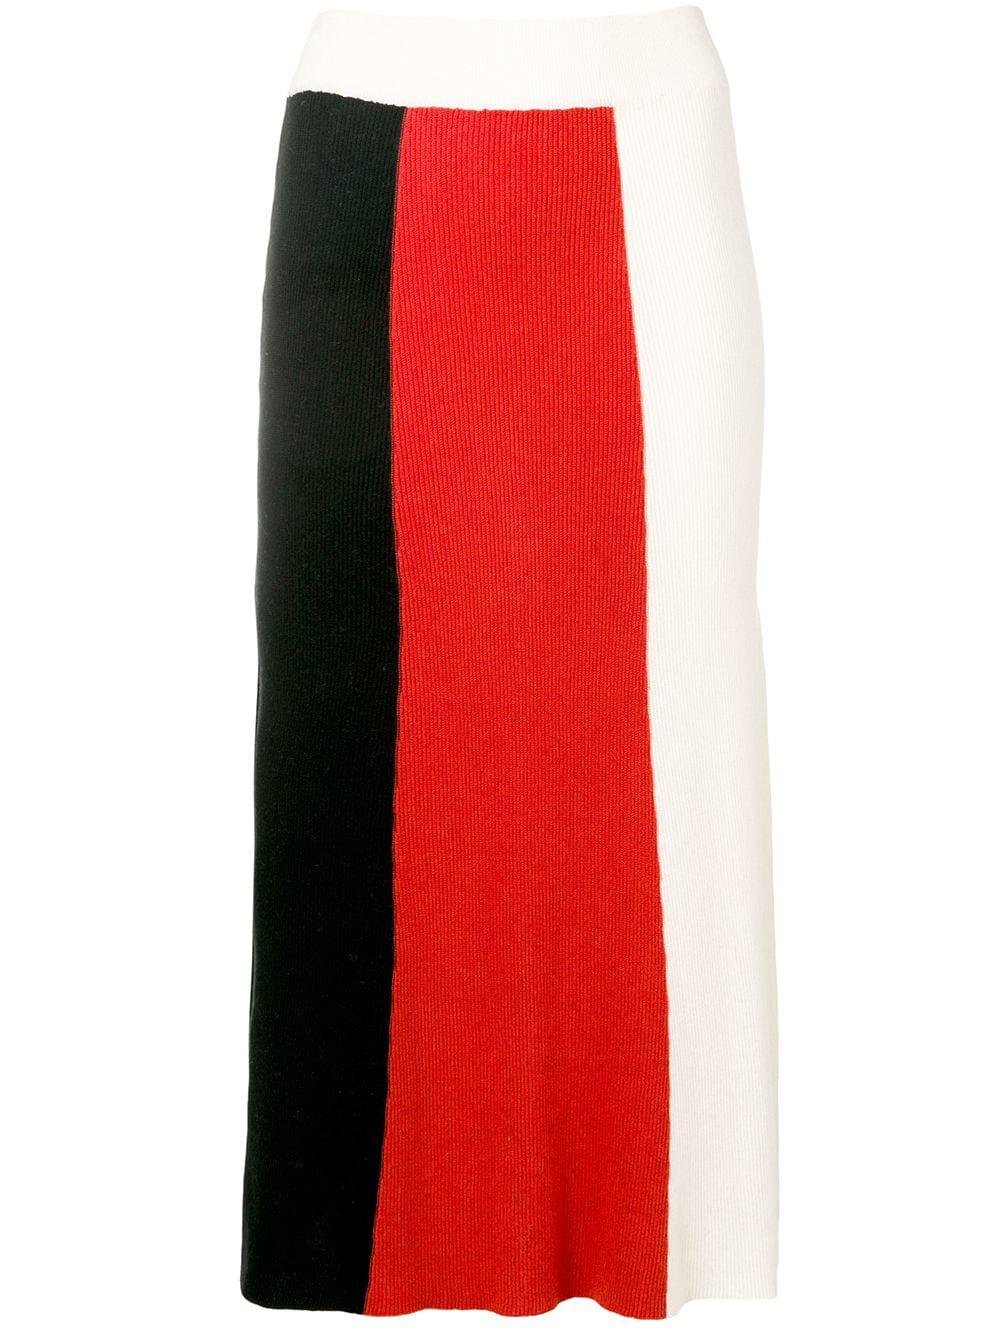 colour block knitted skirt by CASHMERE IN LOVE